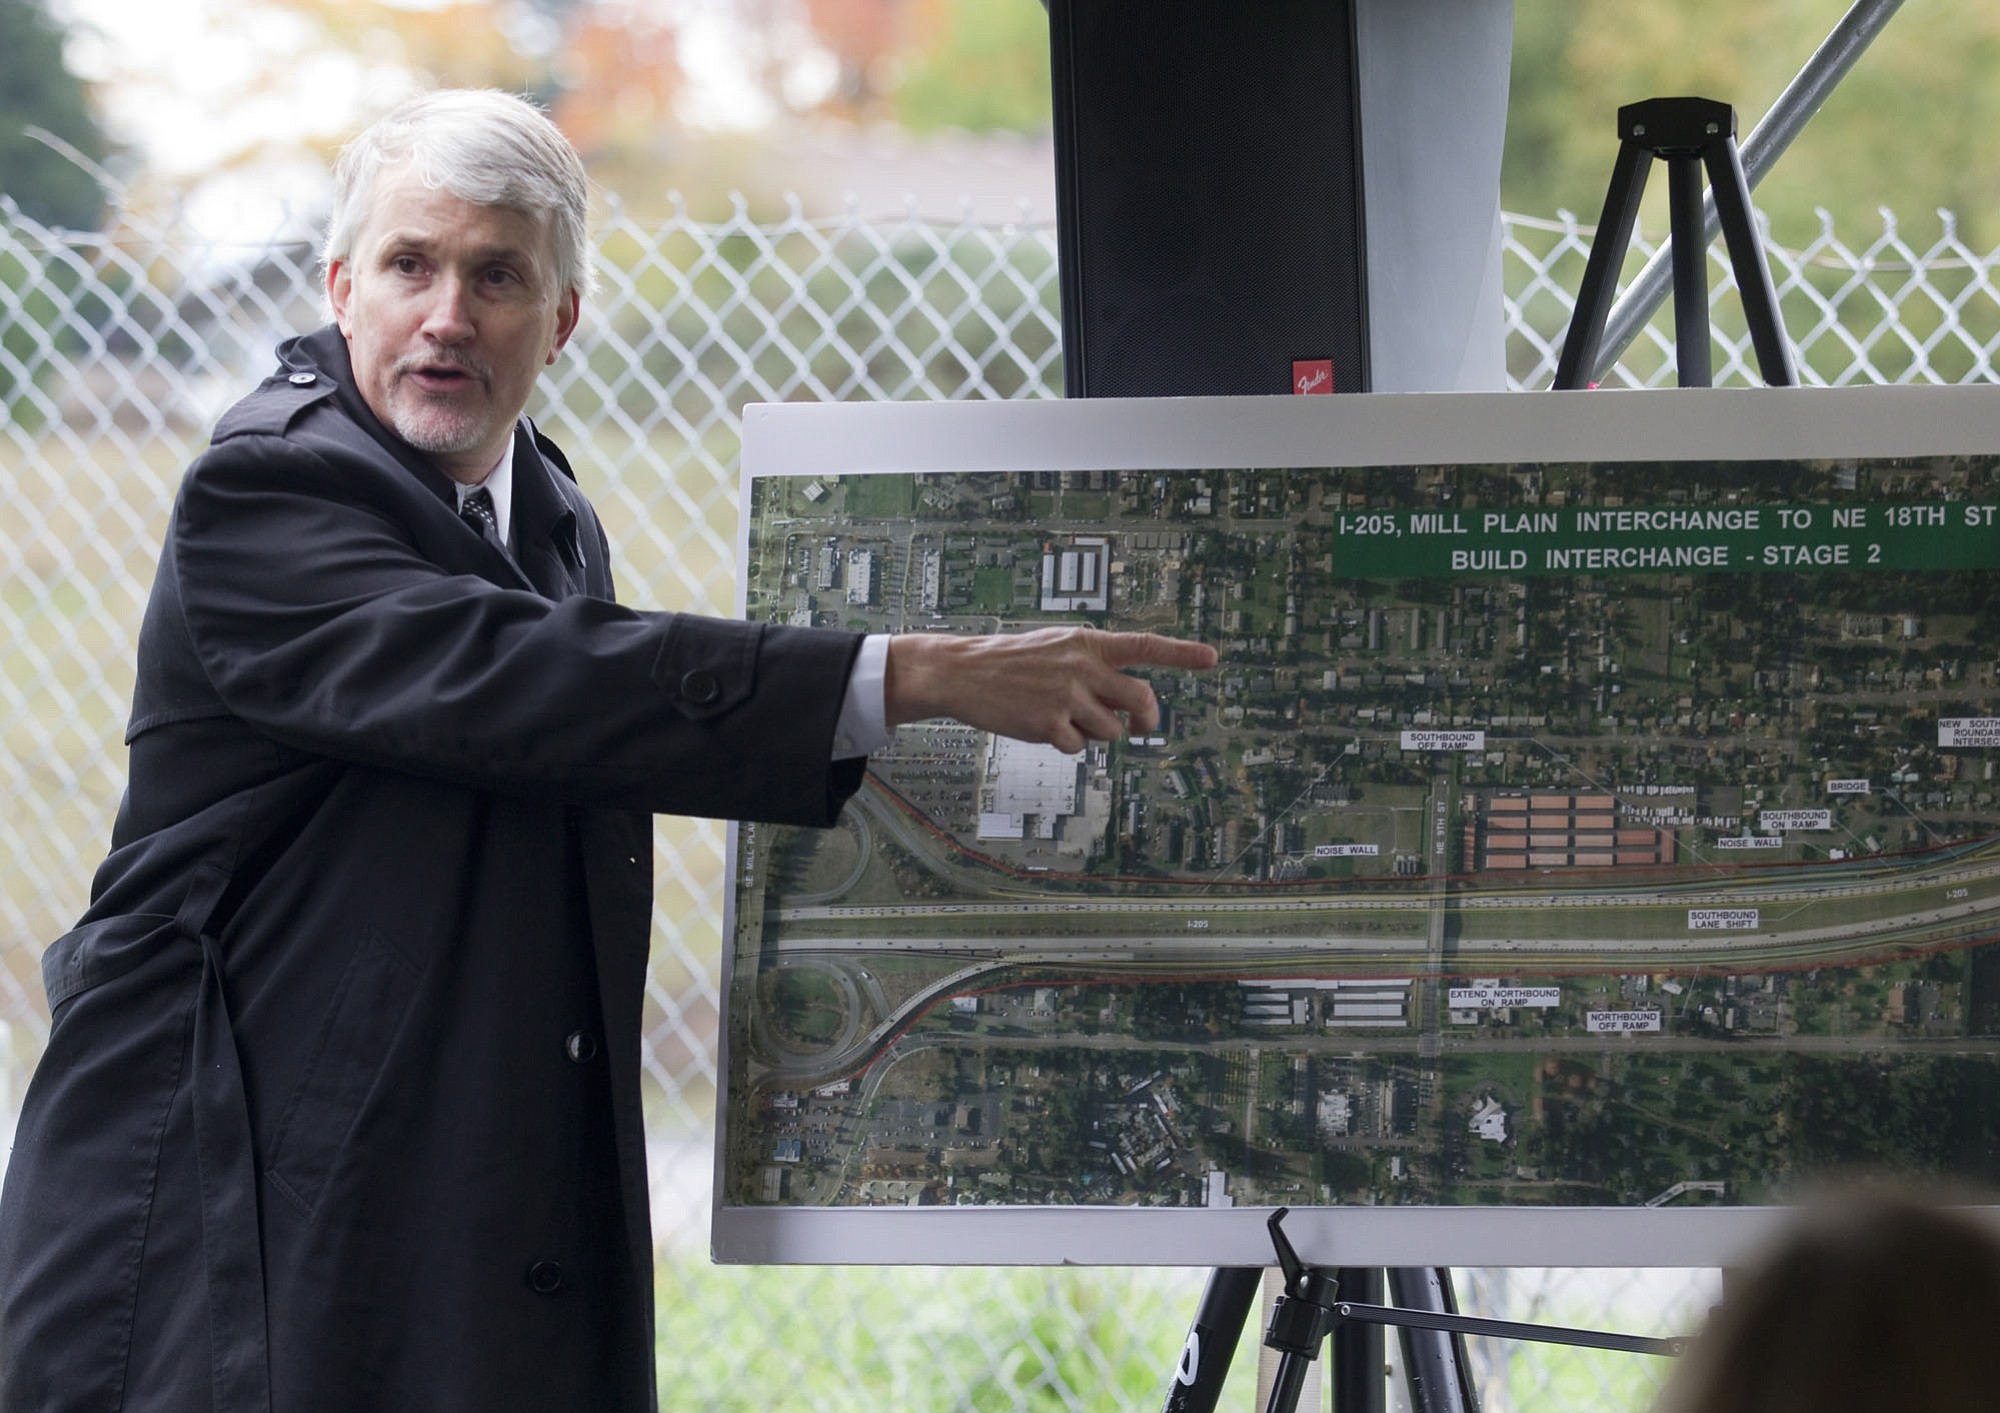 Bart Gernhart, an assistant regional administrator with the Washington State Department of Transportation, describes the features of a new interchange that will connect Interstate 205 and Northeast 18th Street.